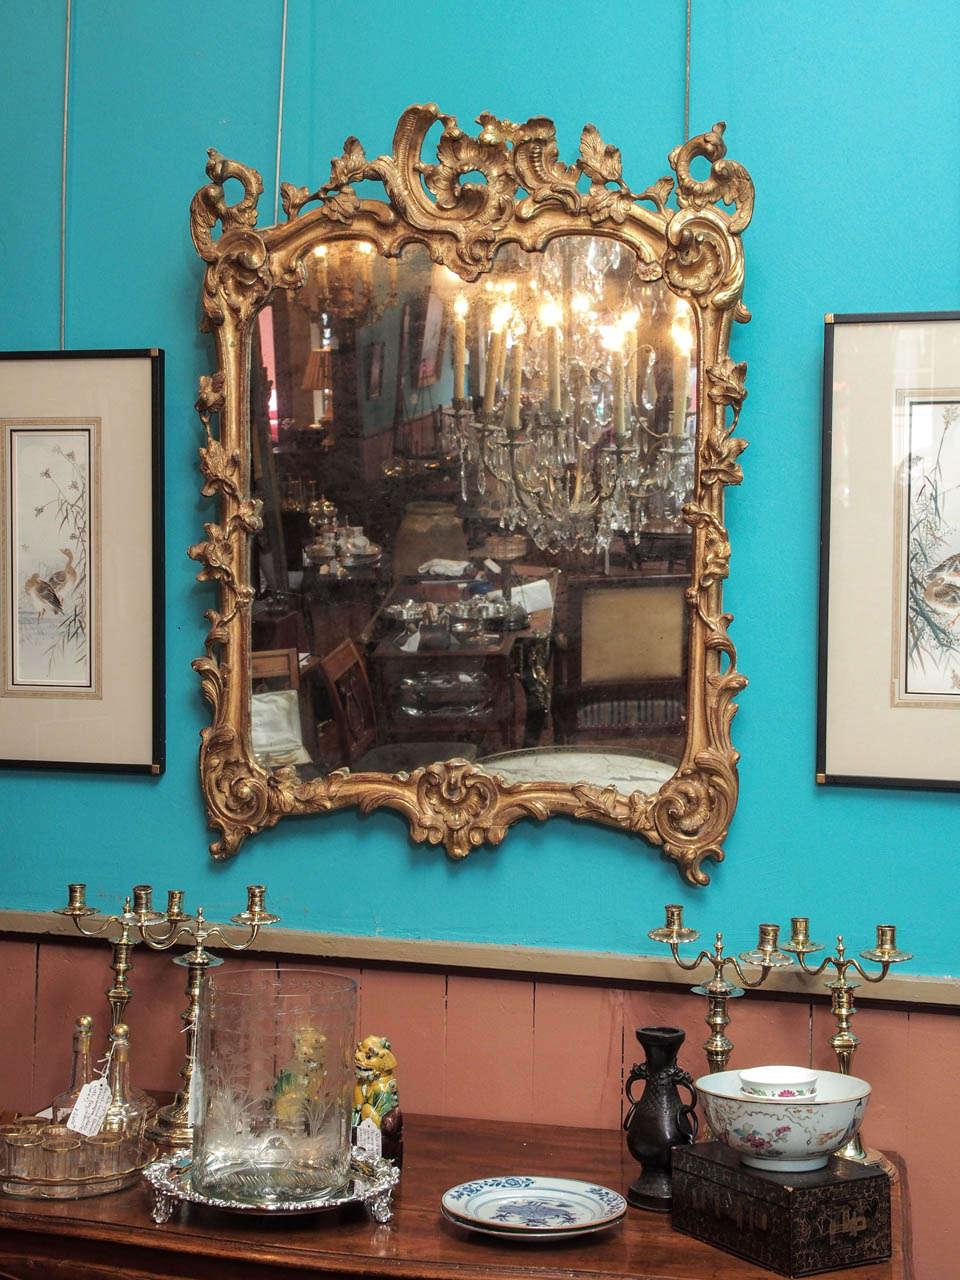 Very fine early 18th century French Regence period carved and gilded mirror in unusual shape, circa 1740.